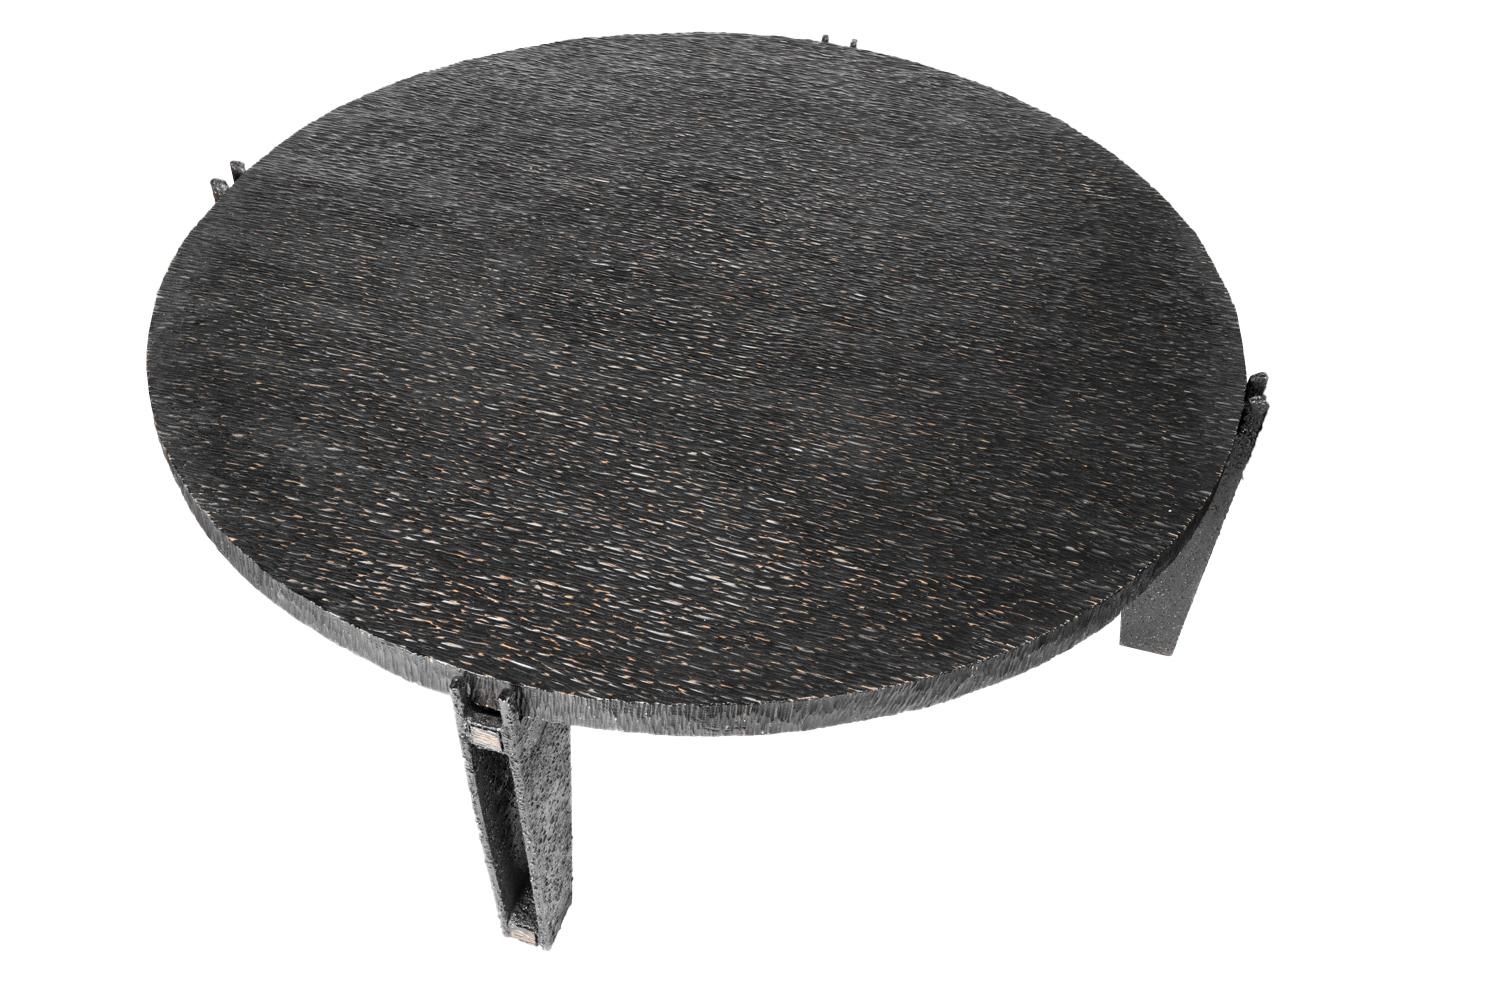 Round coffee table standing on four tapered legs in rectangular black metal, opened in their center.
They support a circular tray in blackened gouged wood forming sort of waves.

French contemporary work.

The gouged wood is a technique of wood